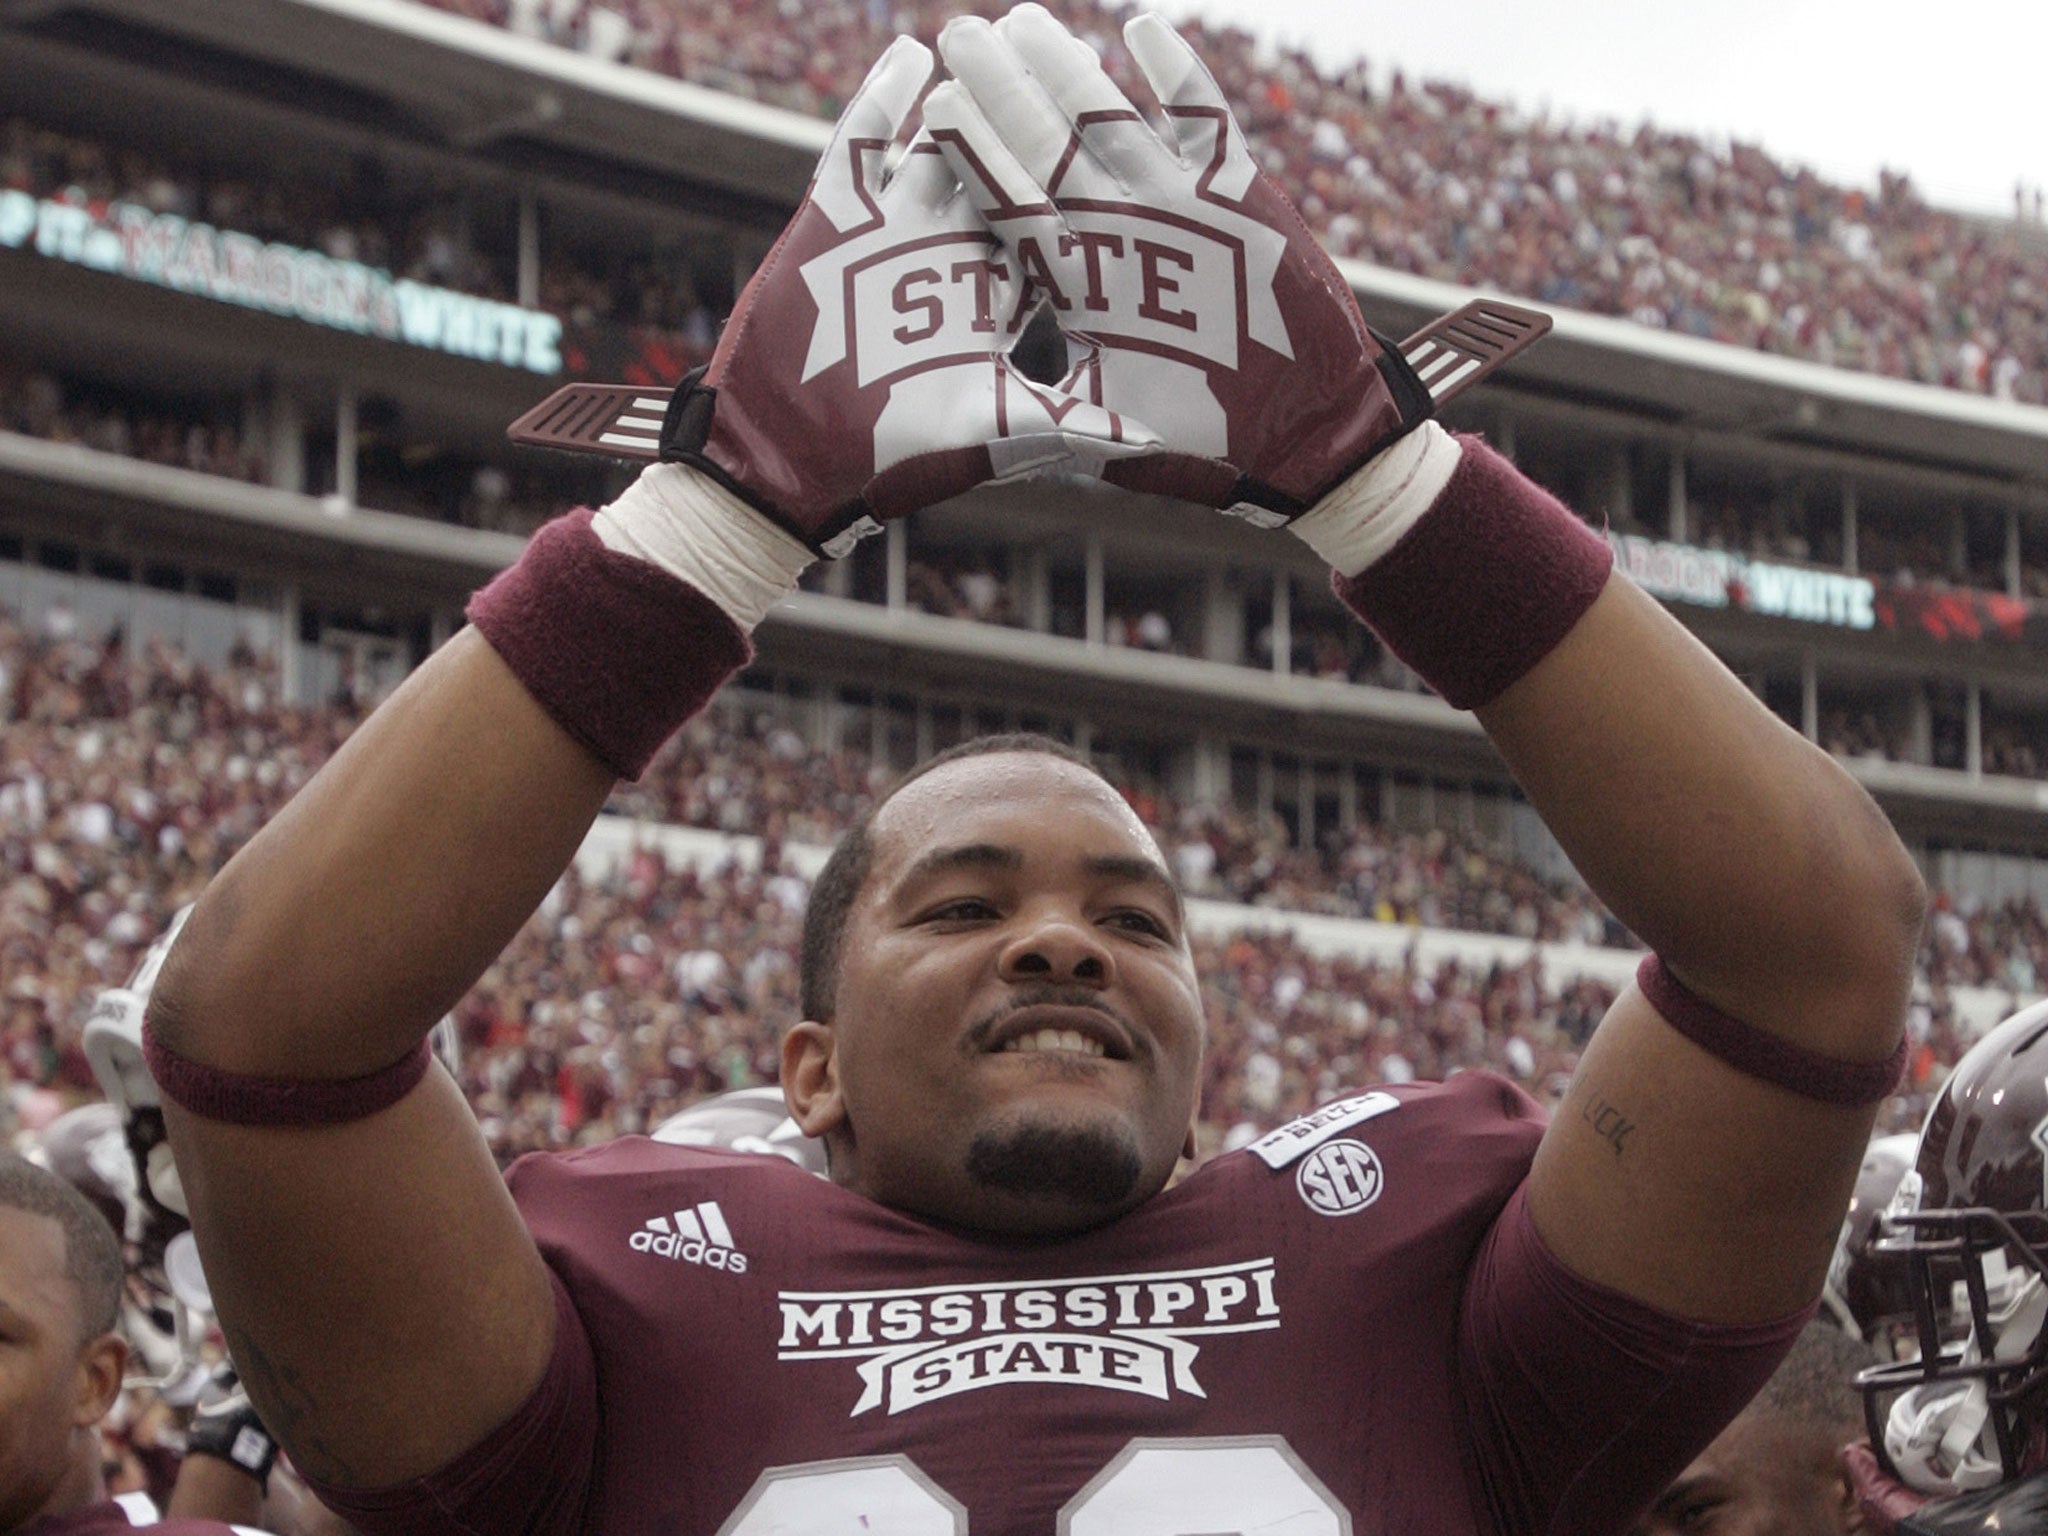 Tight end Rufus Warren of the Mississippi State Bulldogs celebrates a win. He told NFL hopeful Michael Sam that he "looks down" on gay players after Mr Sam revealed he is gay.